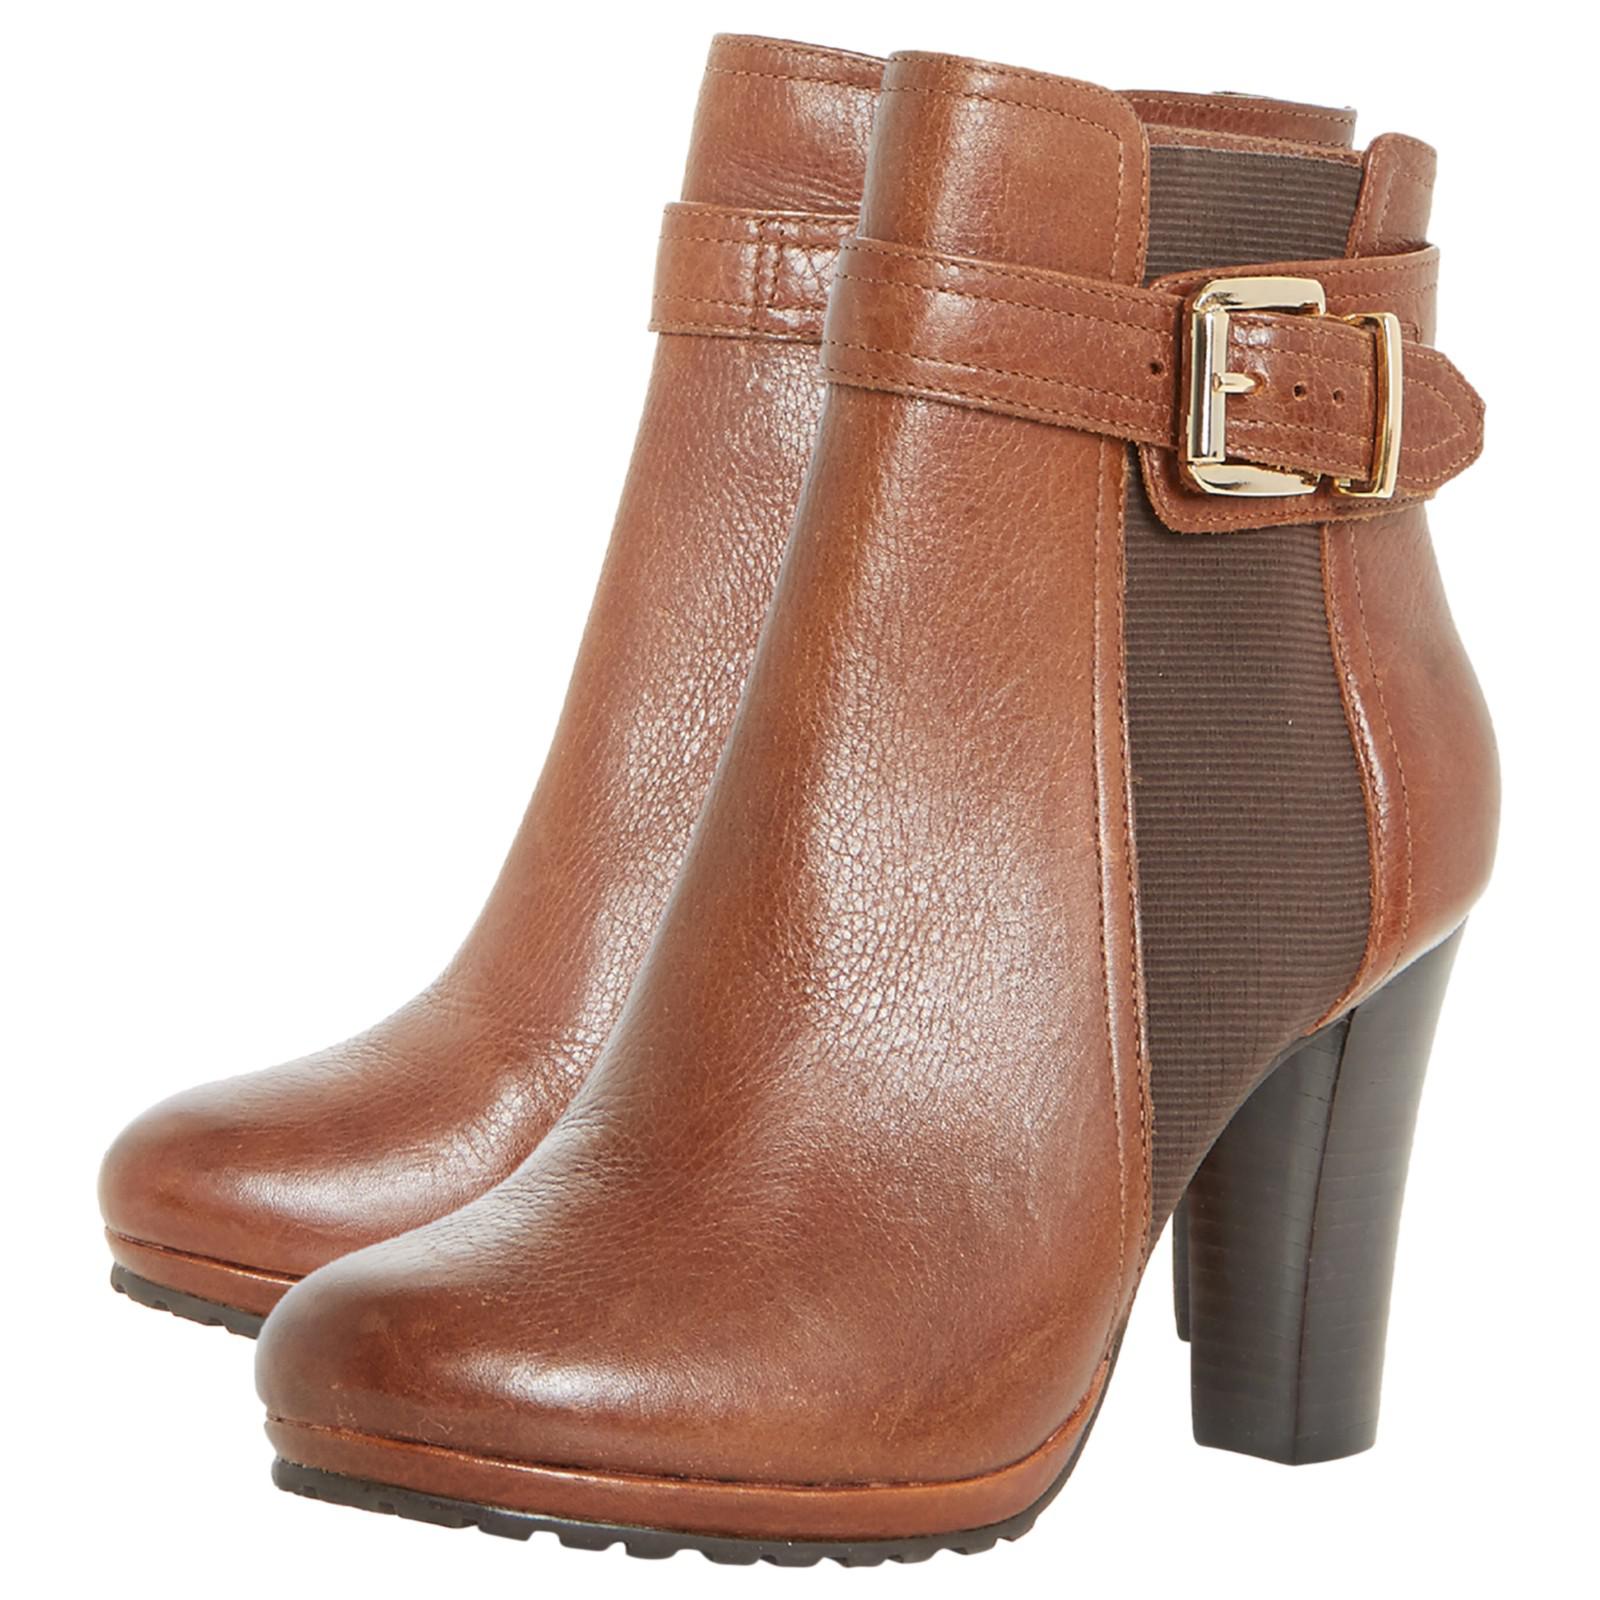 Dune Leather Orine Block Heeled Ankle Boots in Tan (Brown) - Lyst